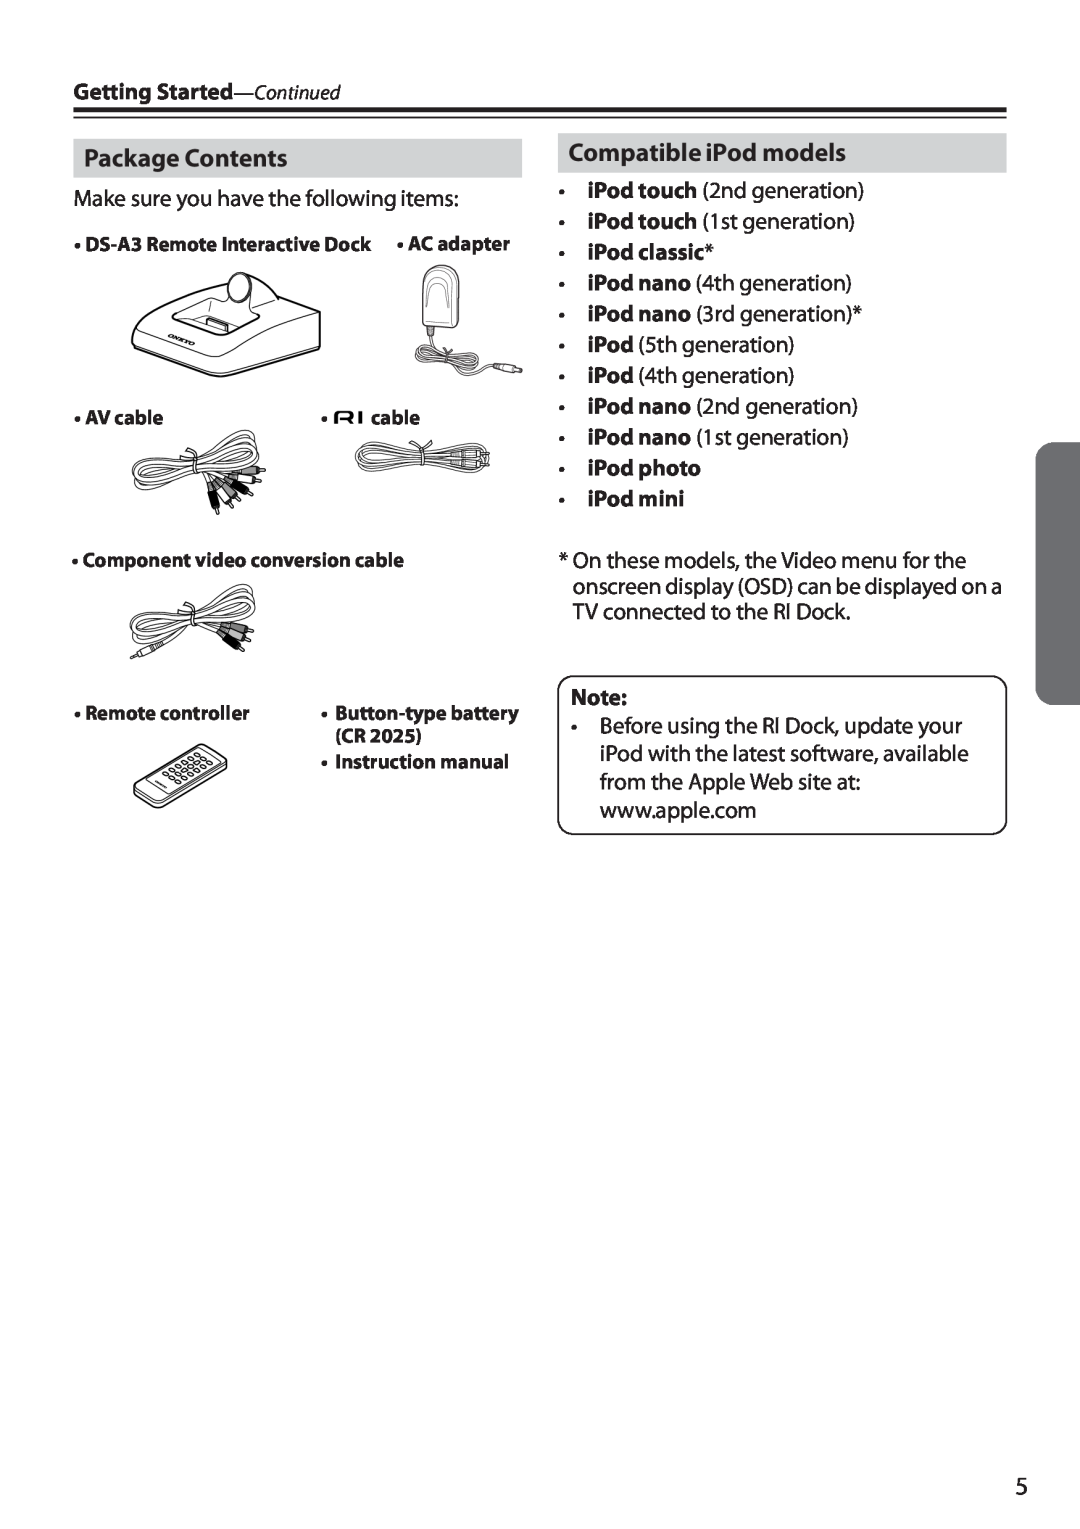 Onkyo D0901-2 Package Contents, Compatible iPod models, Getting Started-Continued, iPod classic, iPod photo iPod mini 